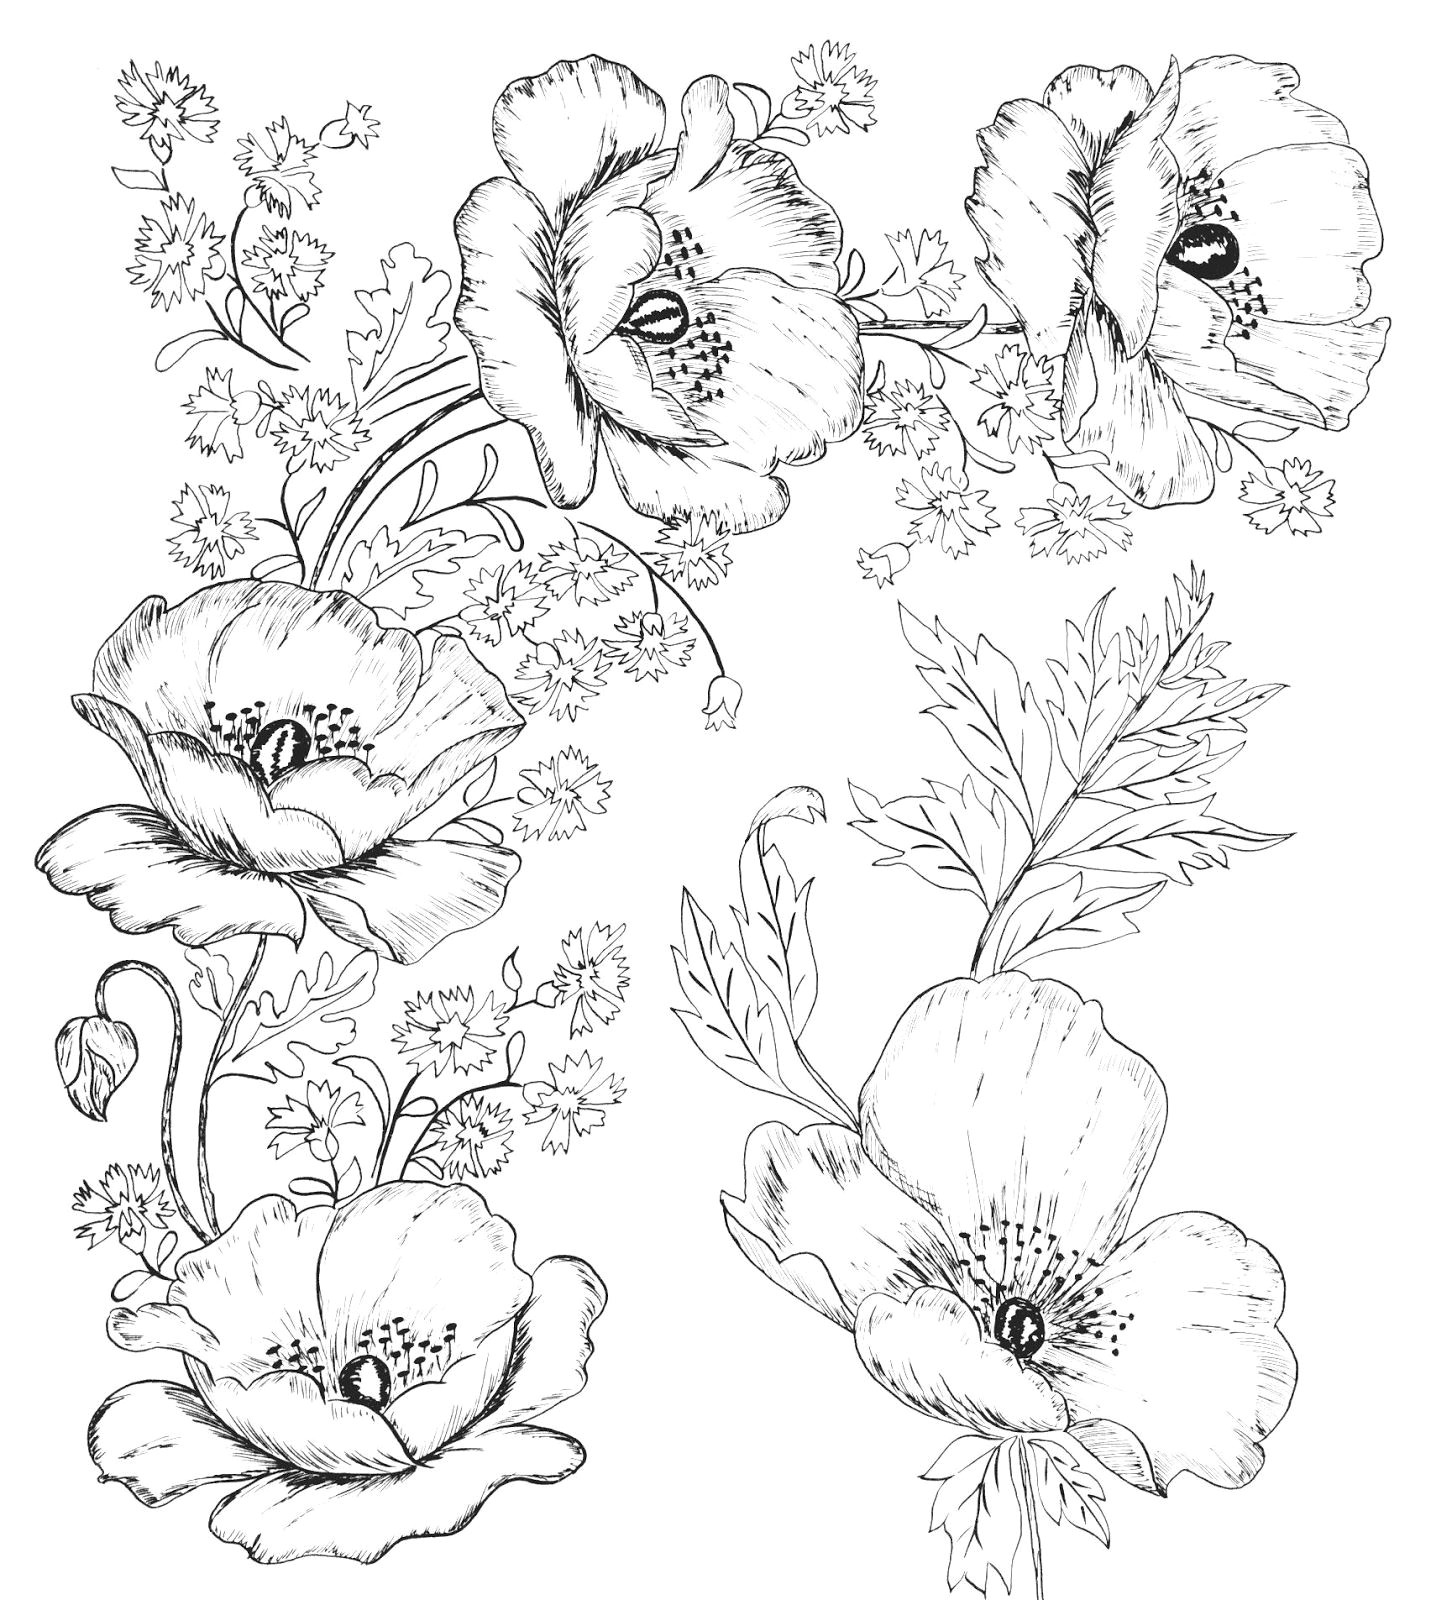 Drawing Flowers for Embroidery Digital Two for Tuesday Beautiful Flower Designs for Embroidery or